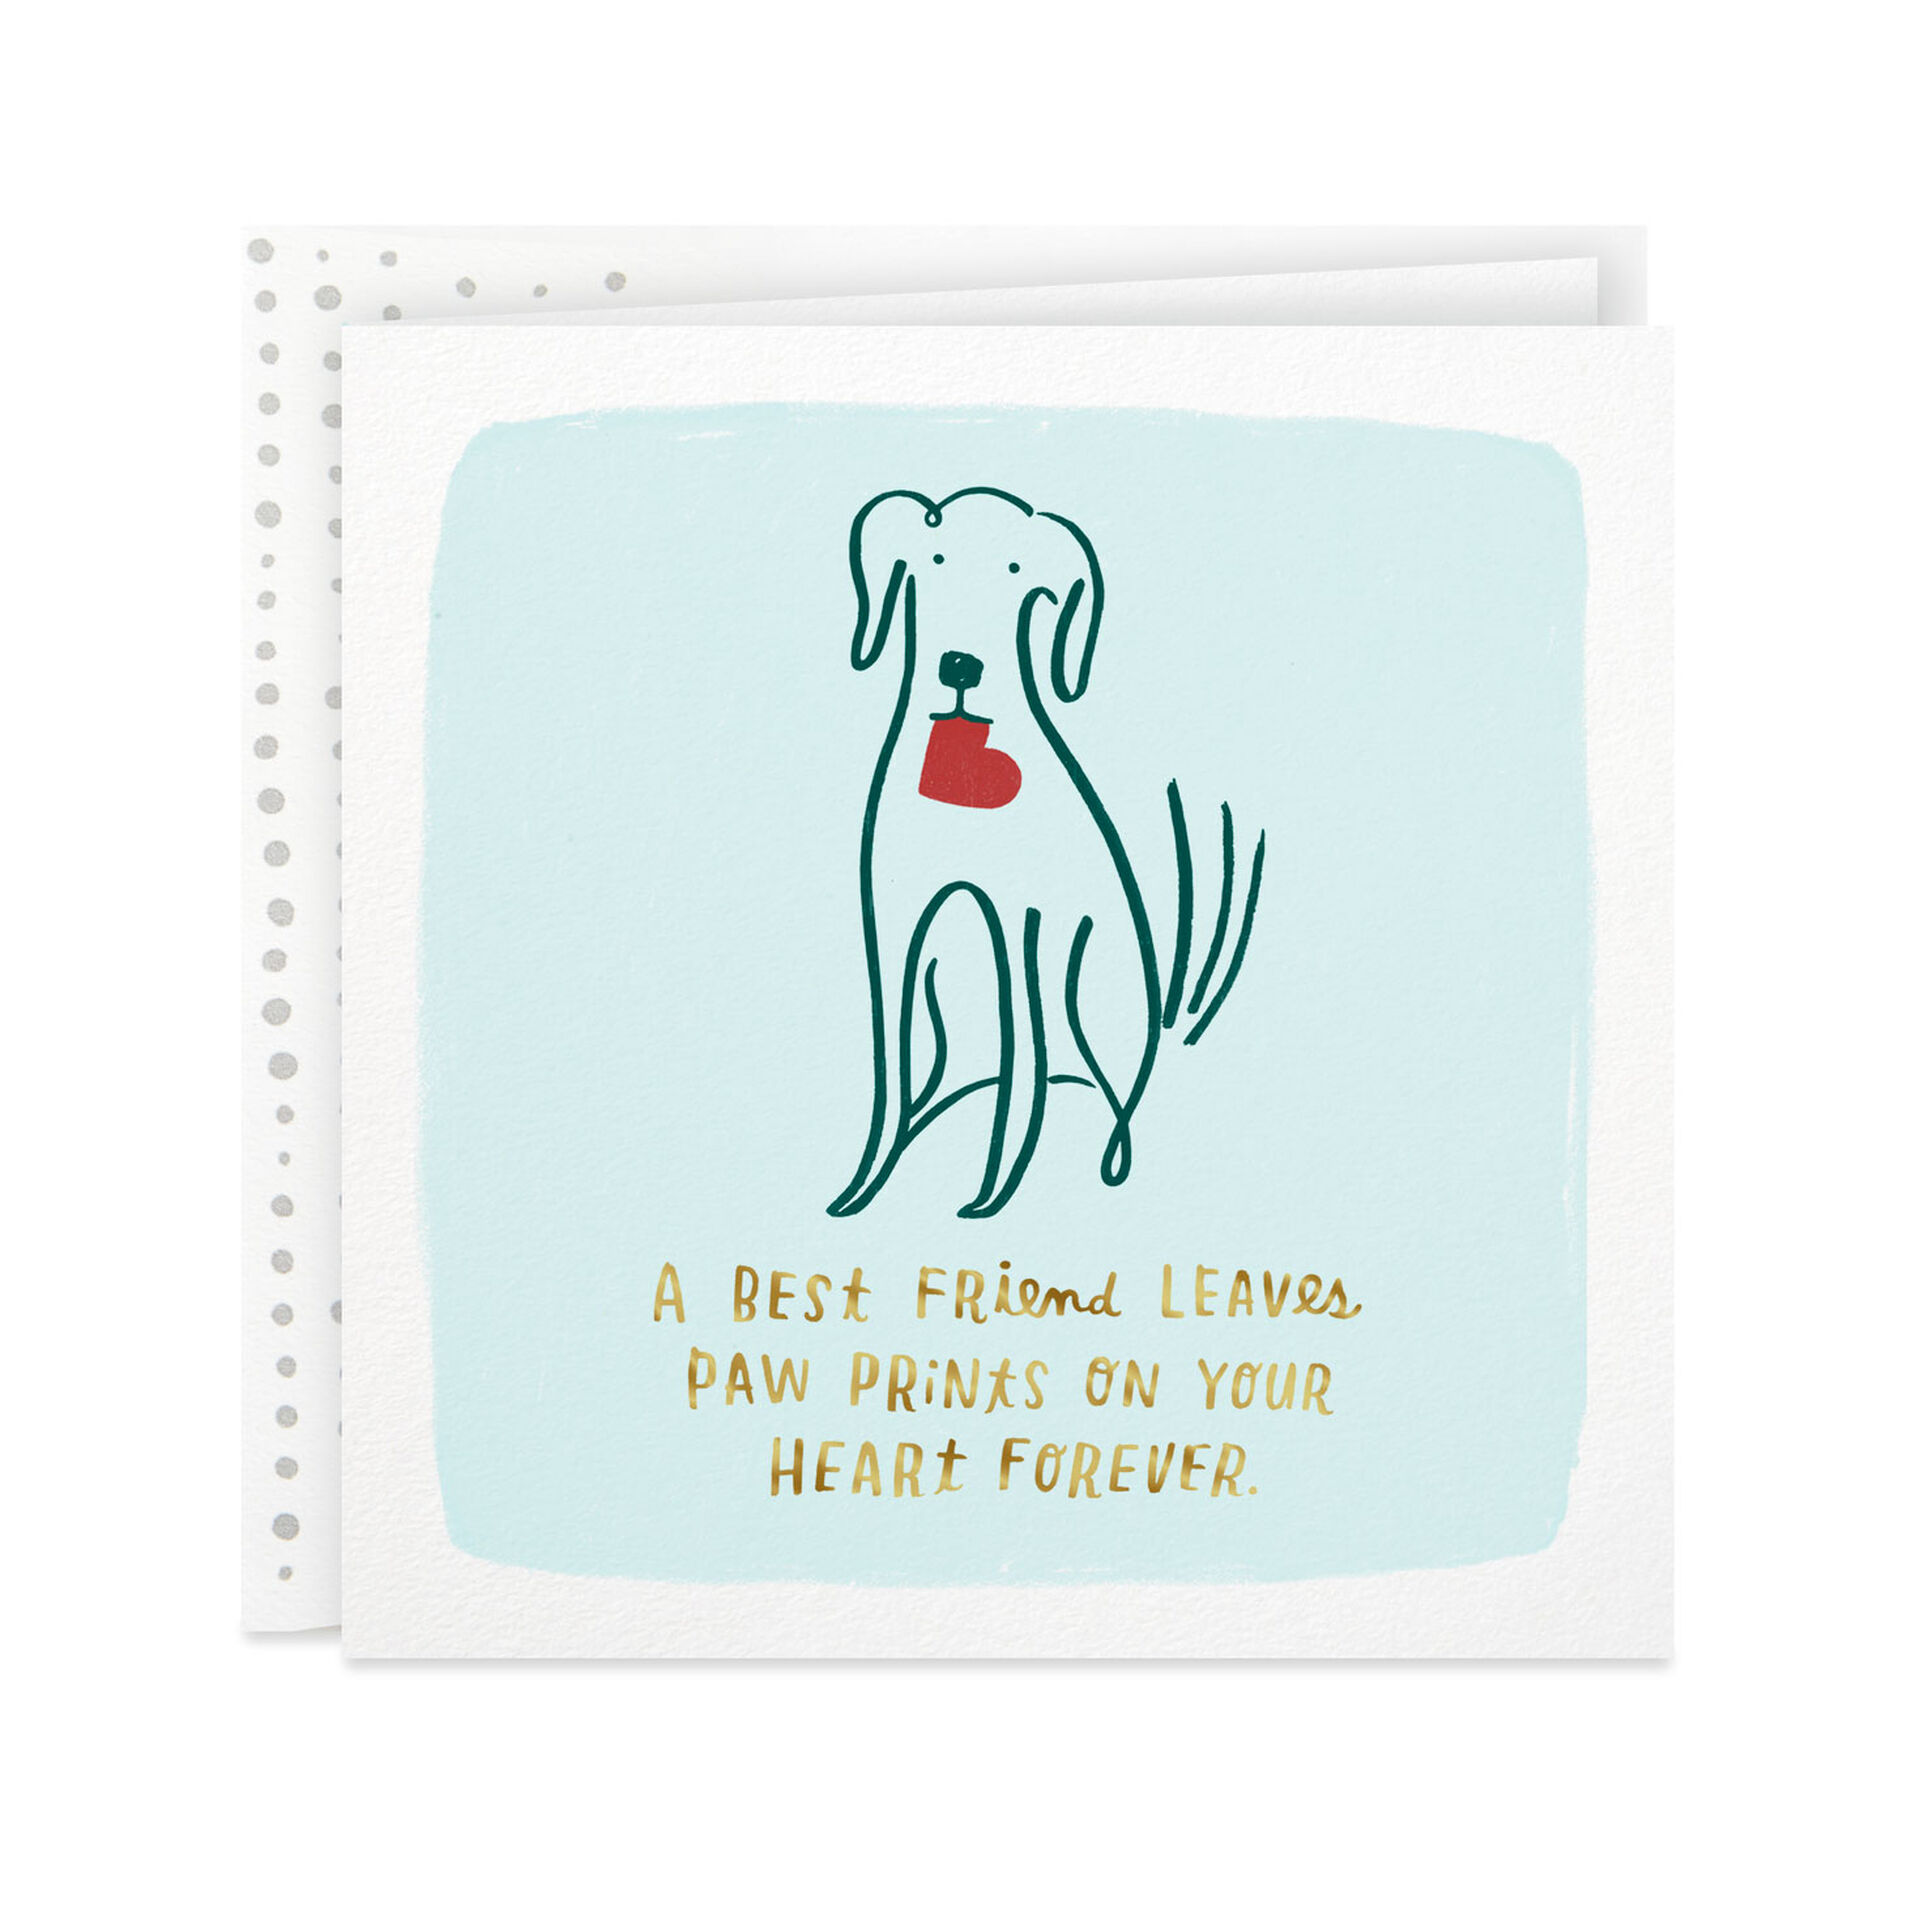 Dog-Carrying-a-Heart-Sympathy-Card-for-Loss-of-Pet_359YYS1436_01